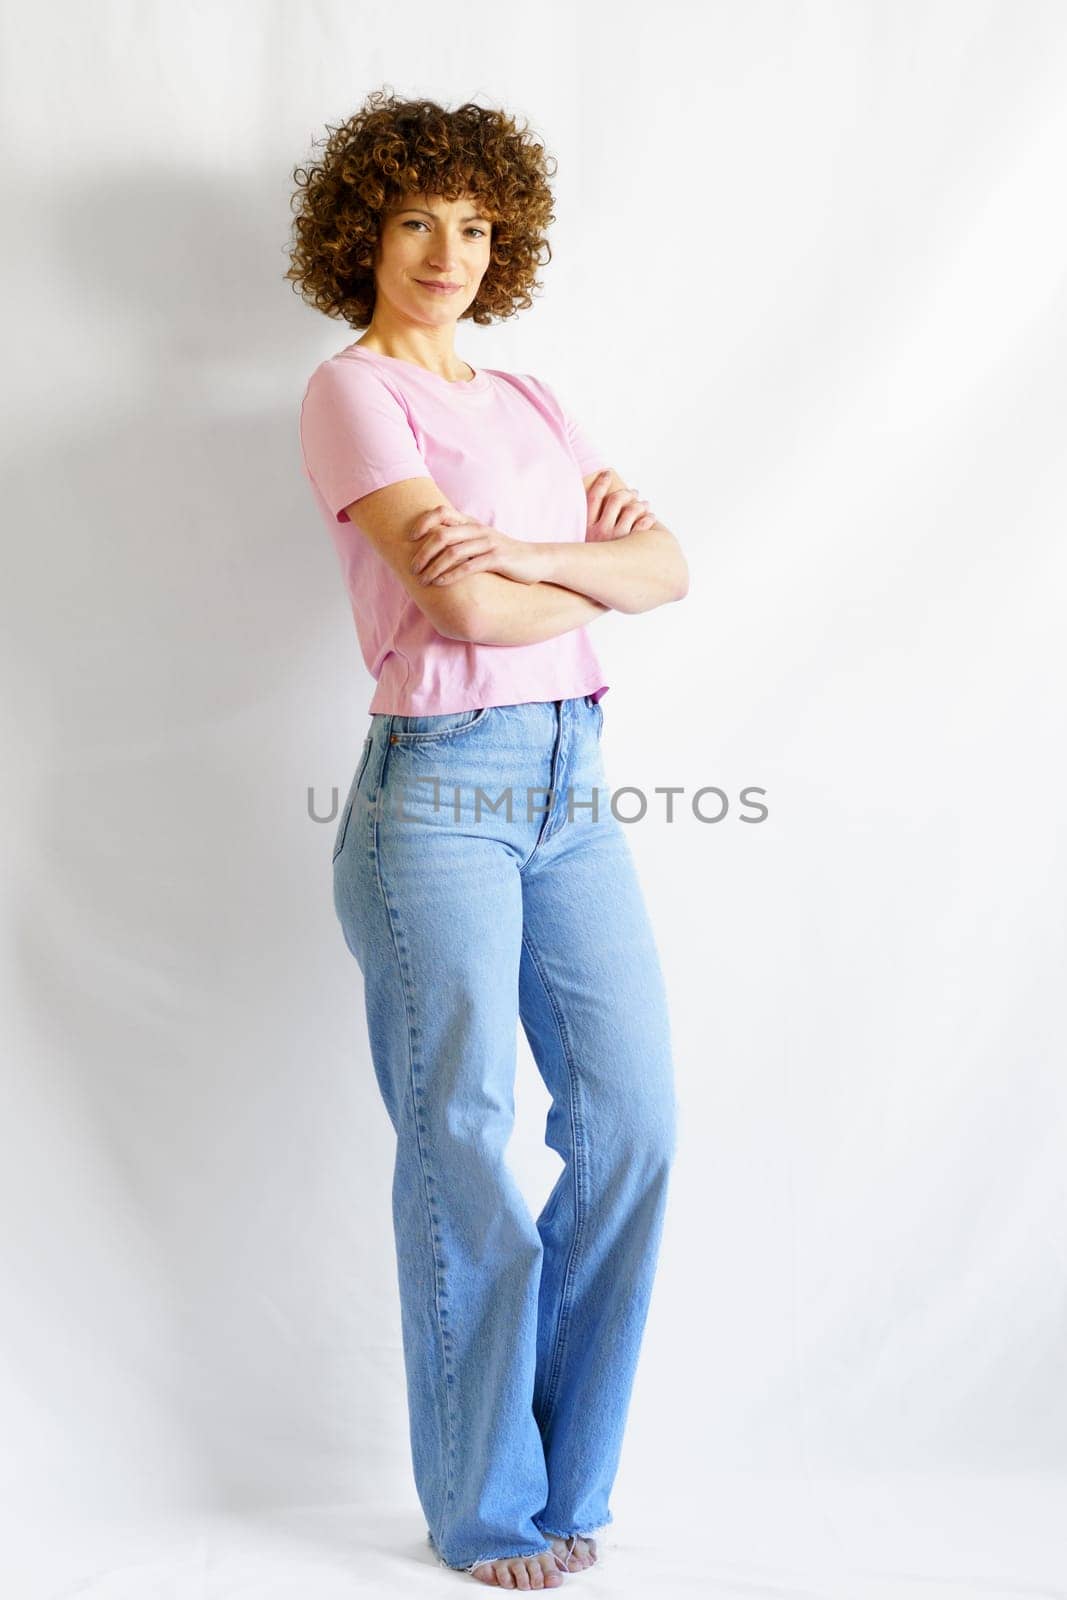 Full body of woman with curly hair standing against white wall crossing arms by javiindy